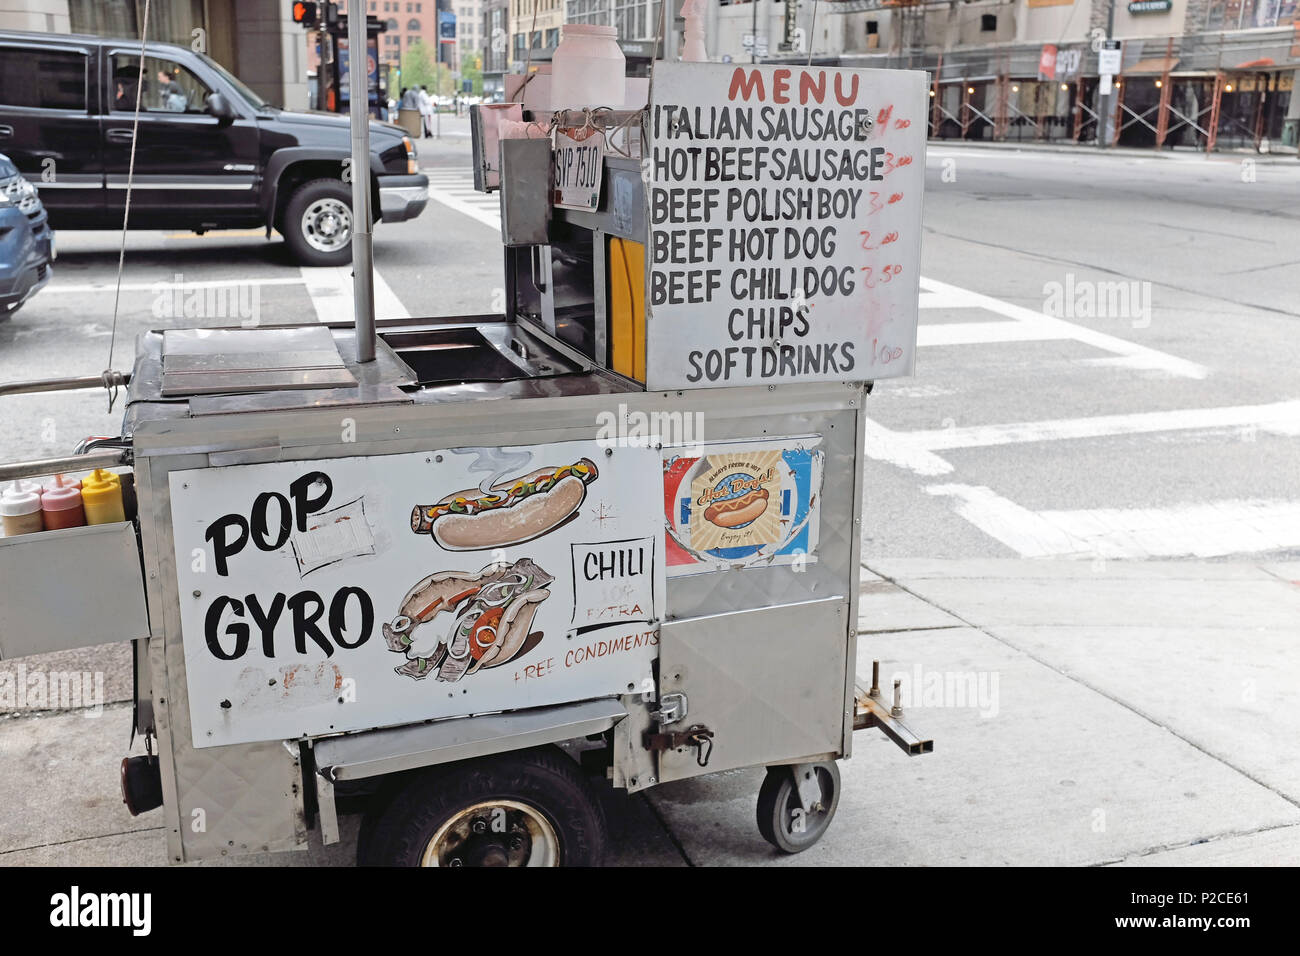 Hot dog cart with menu of avaiable items with prices rests on a sidewalk in downtown Cleveland, Ohio, USA. Stock Photo